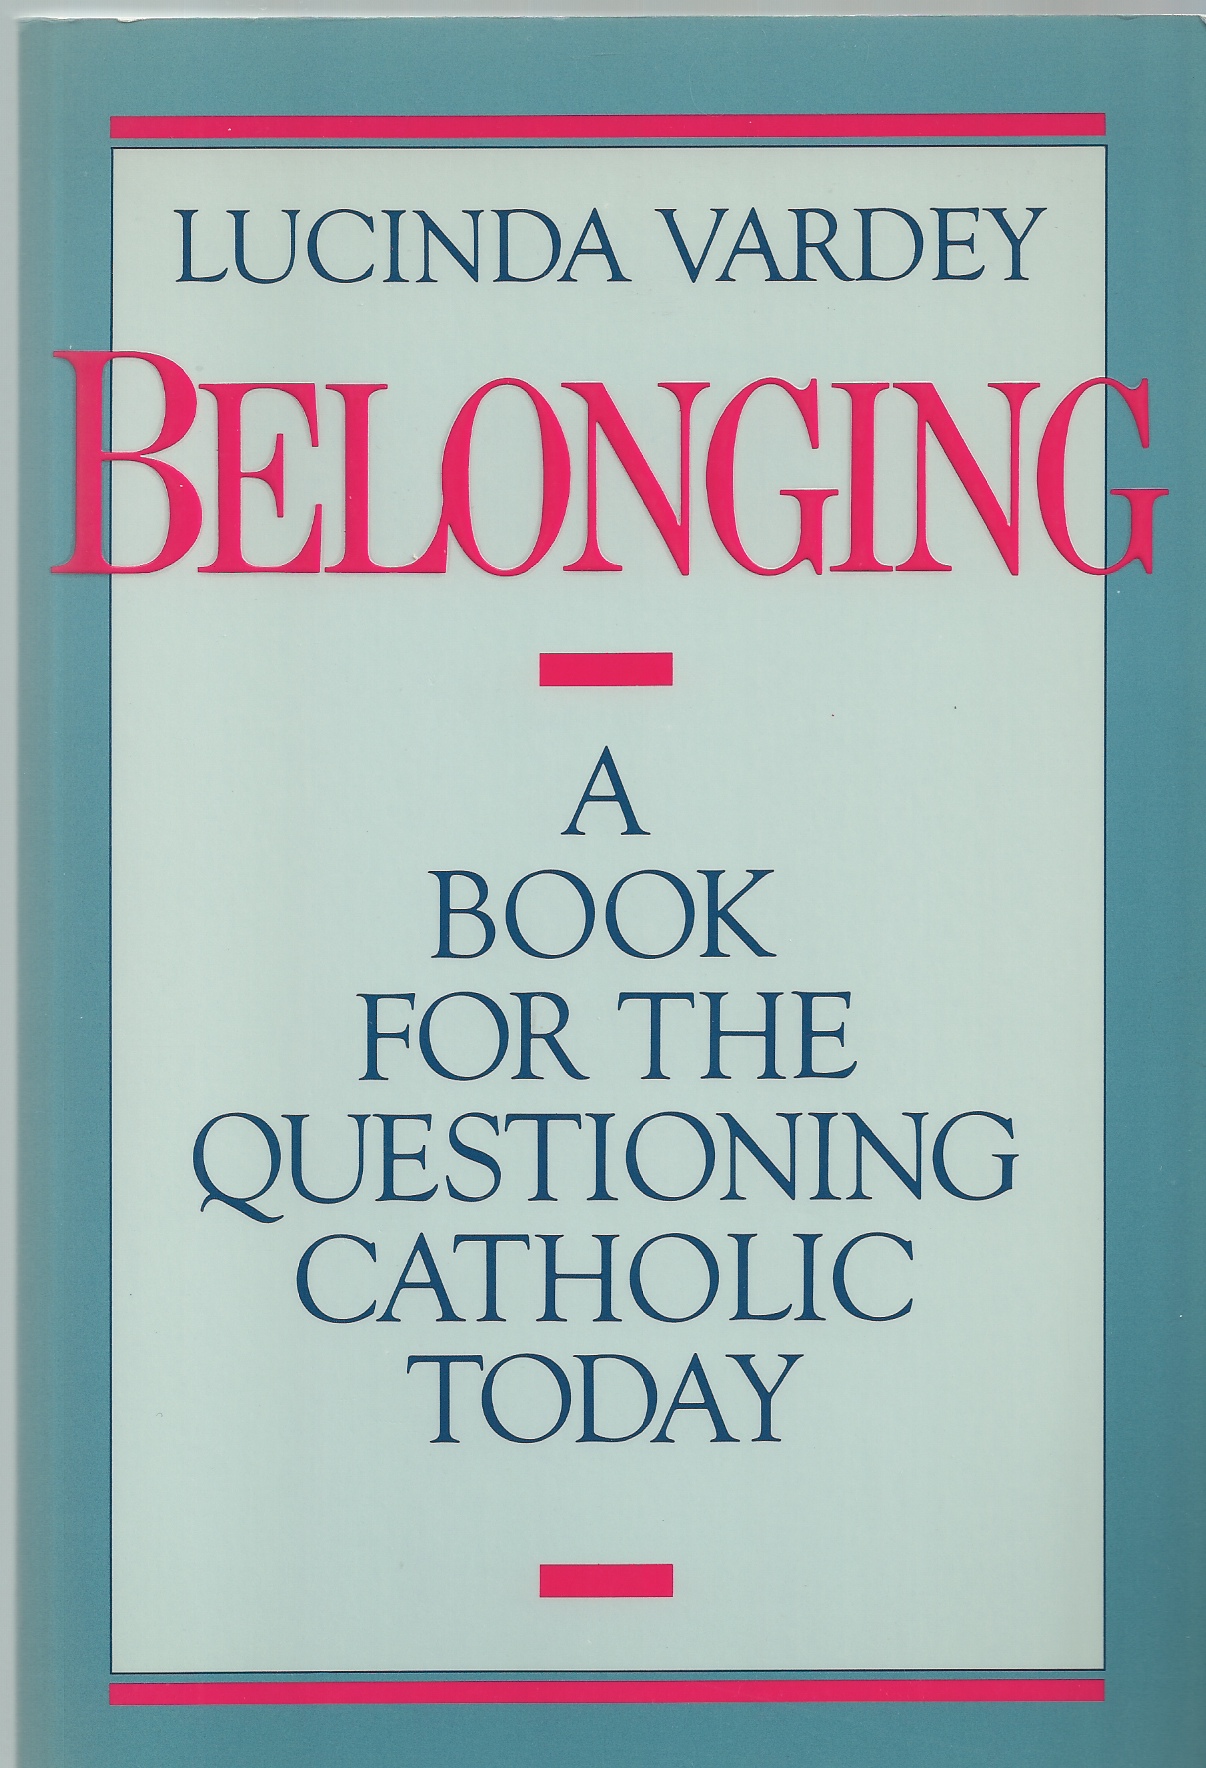 VARDEY LUCINDA - Belonging: A Book for the Questioning Catholic Today